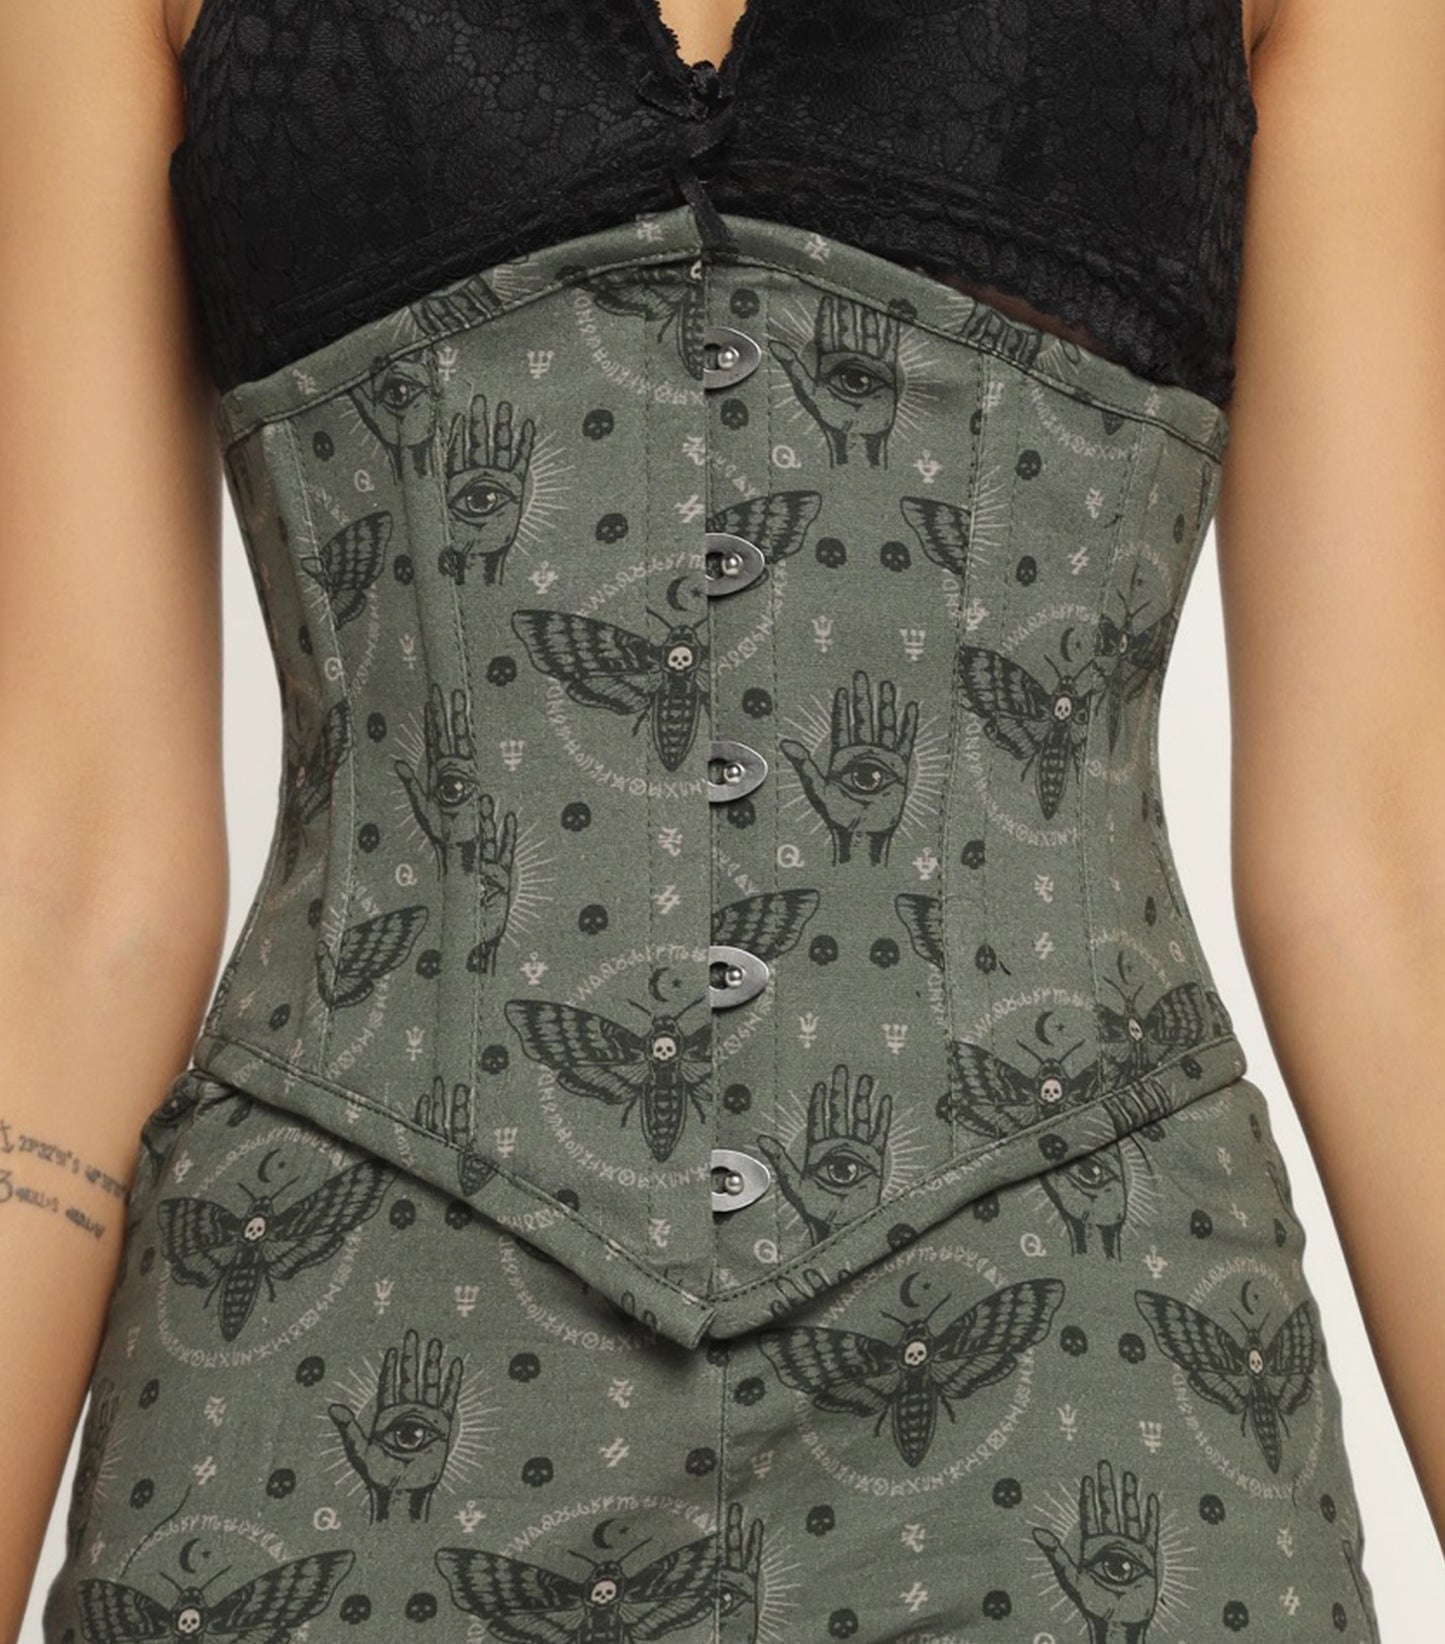 Bees printed Waist Reducing Authentic Steel Boned Sexy Underbust Corset Dress